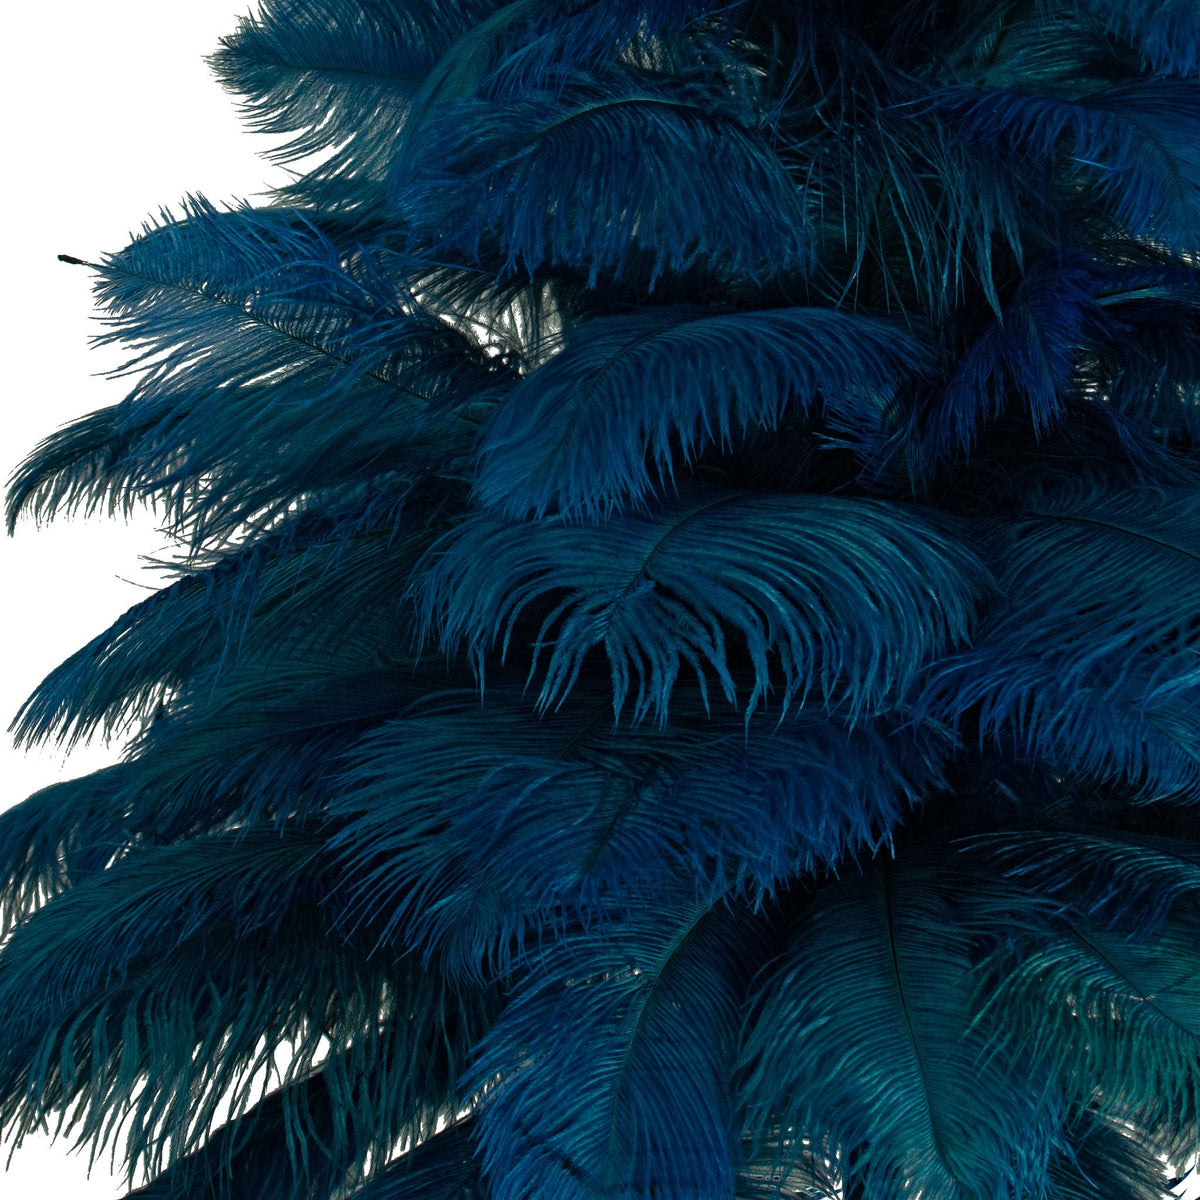 Blue Ostrich Feather Christmas Tree